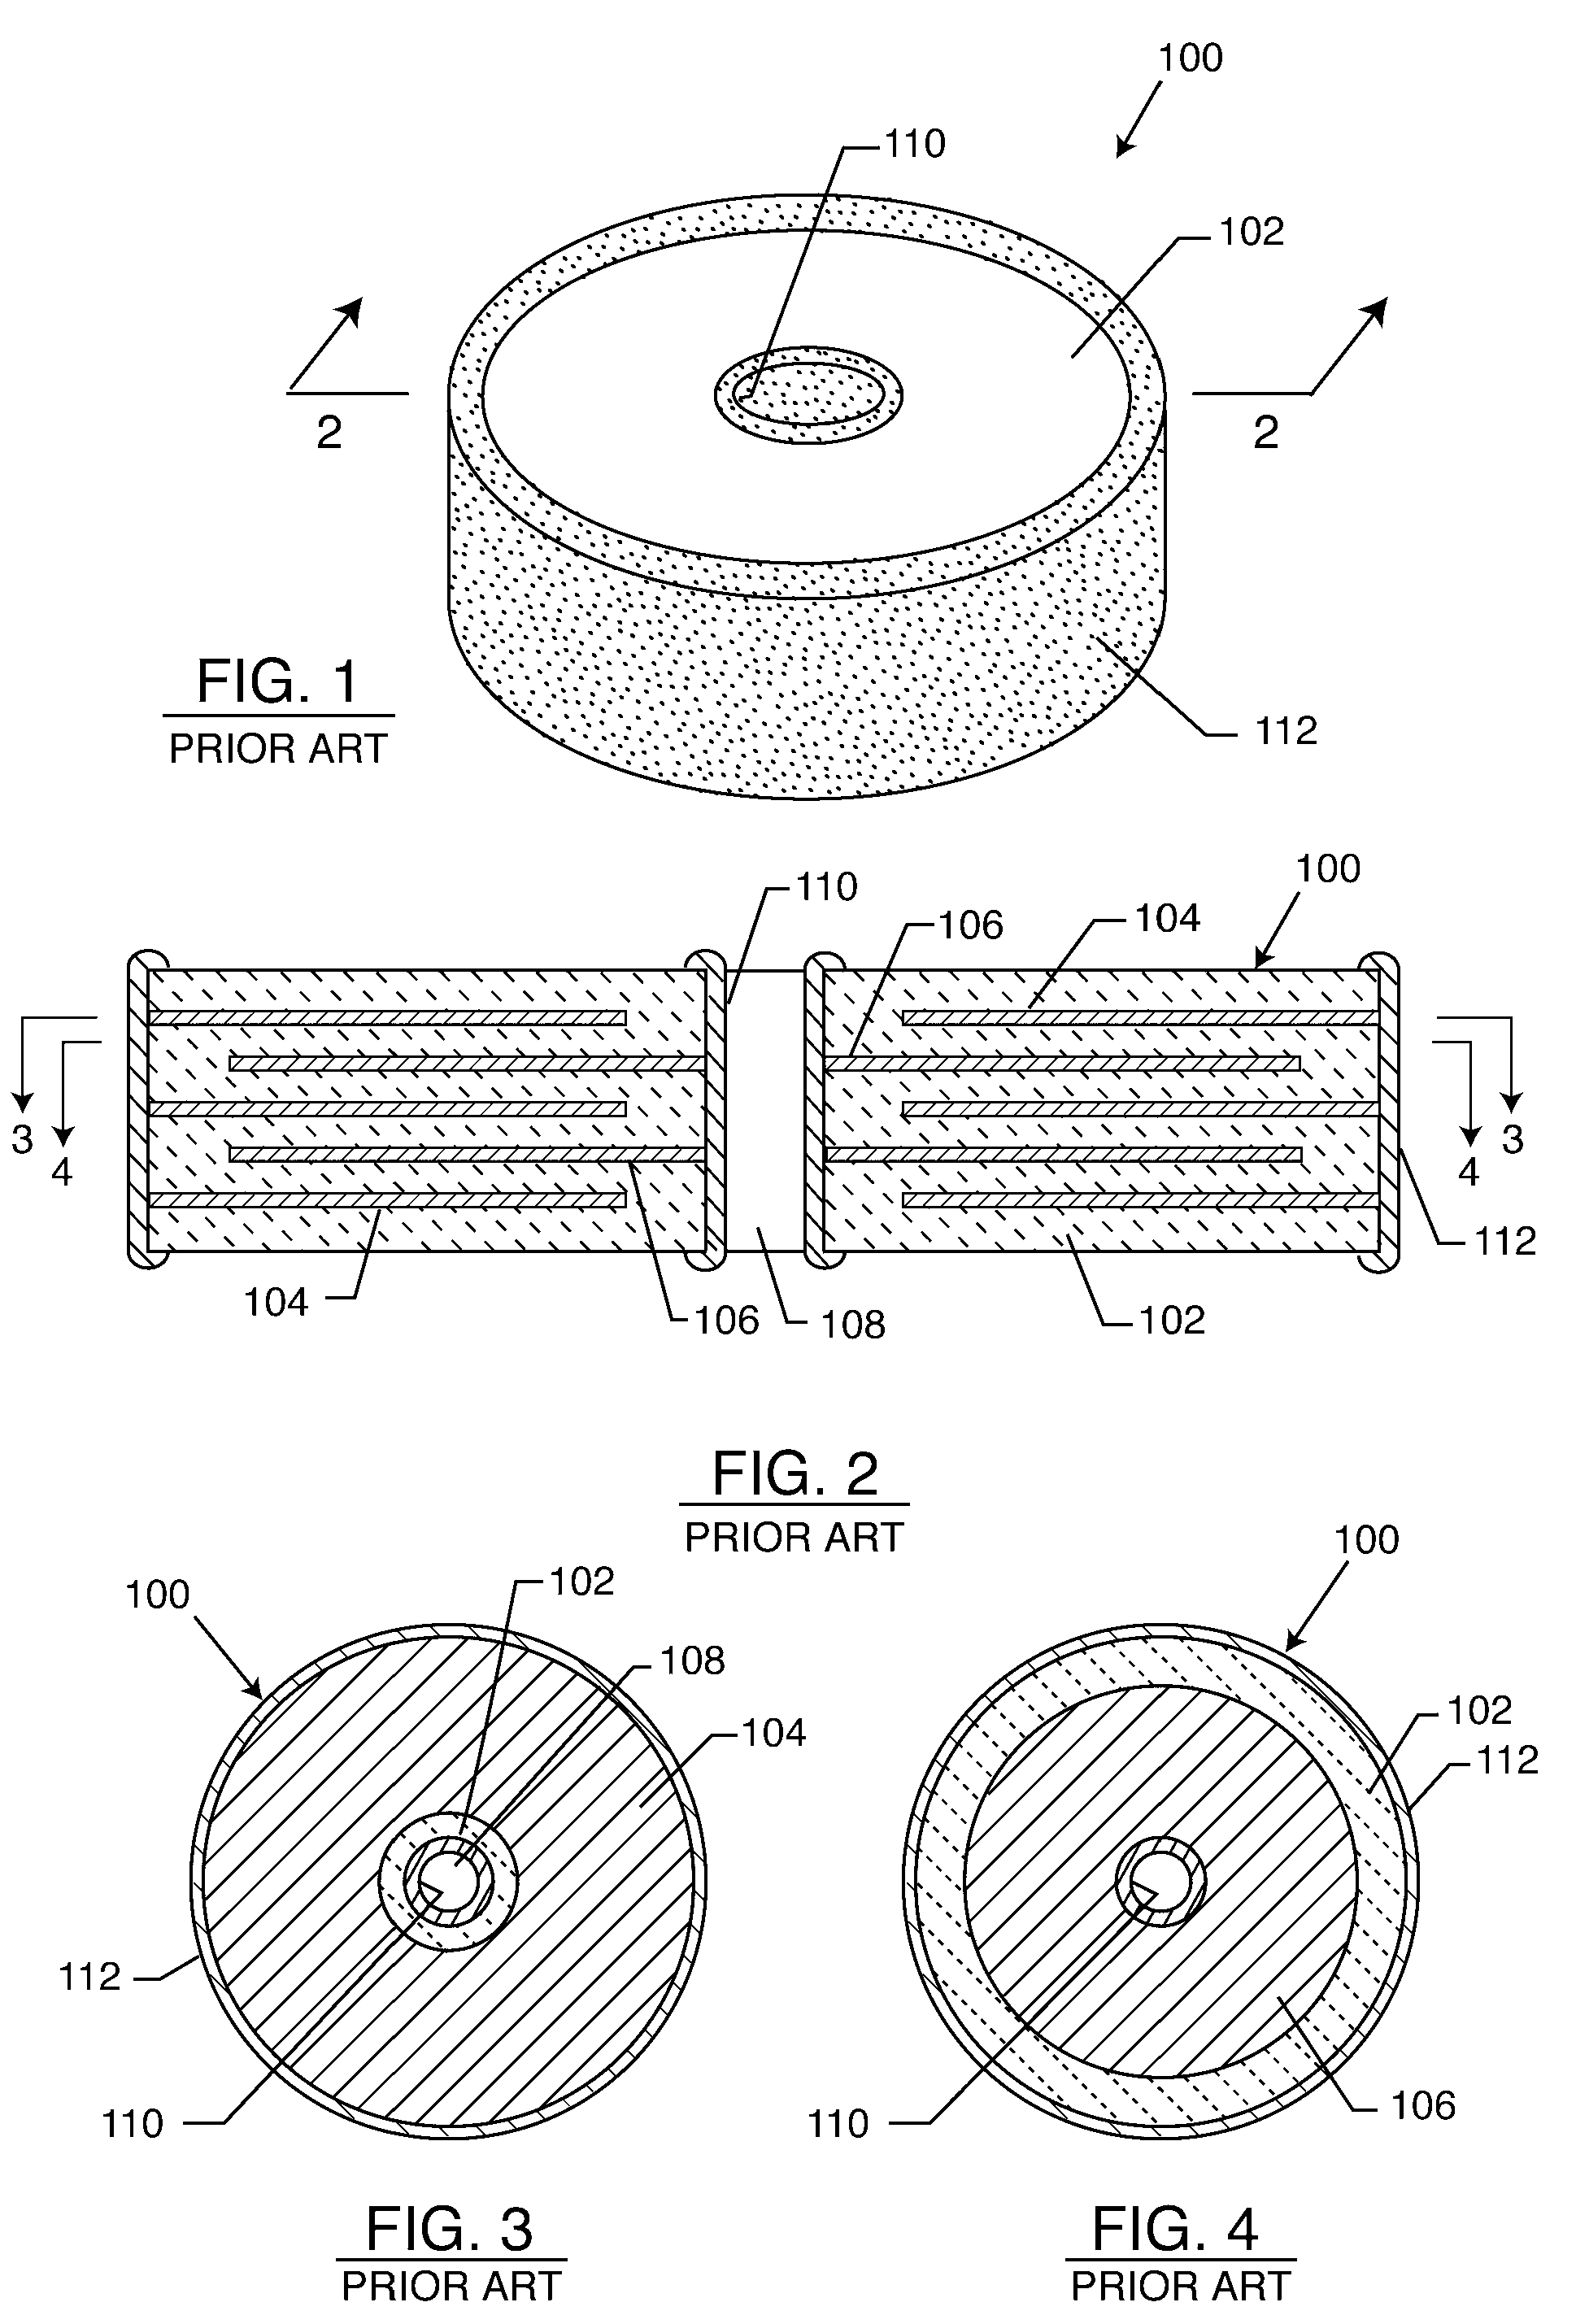 Spring contact system for EMI filtered hermetic seals for active implantable medical devices